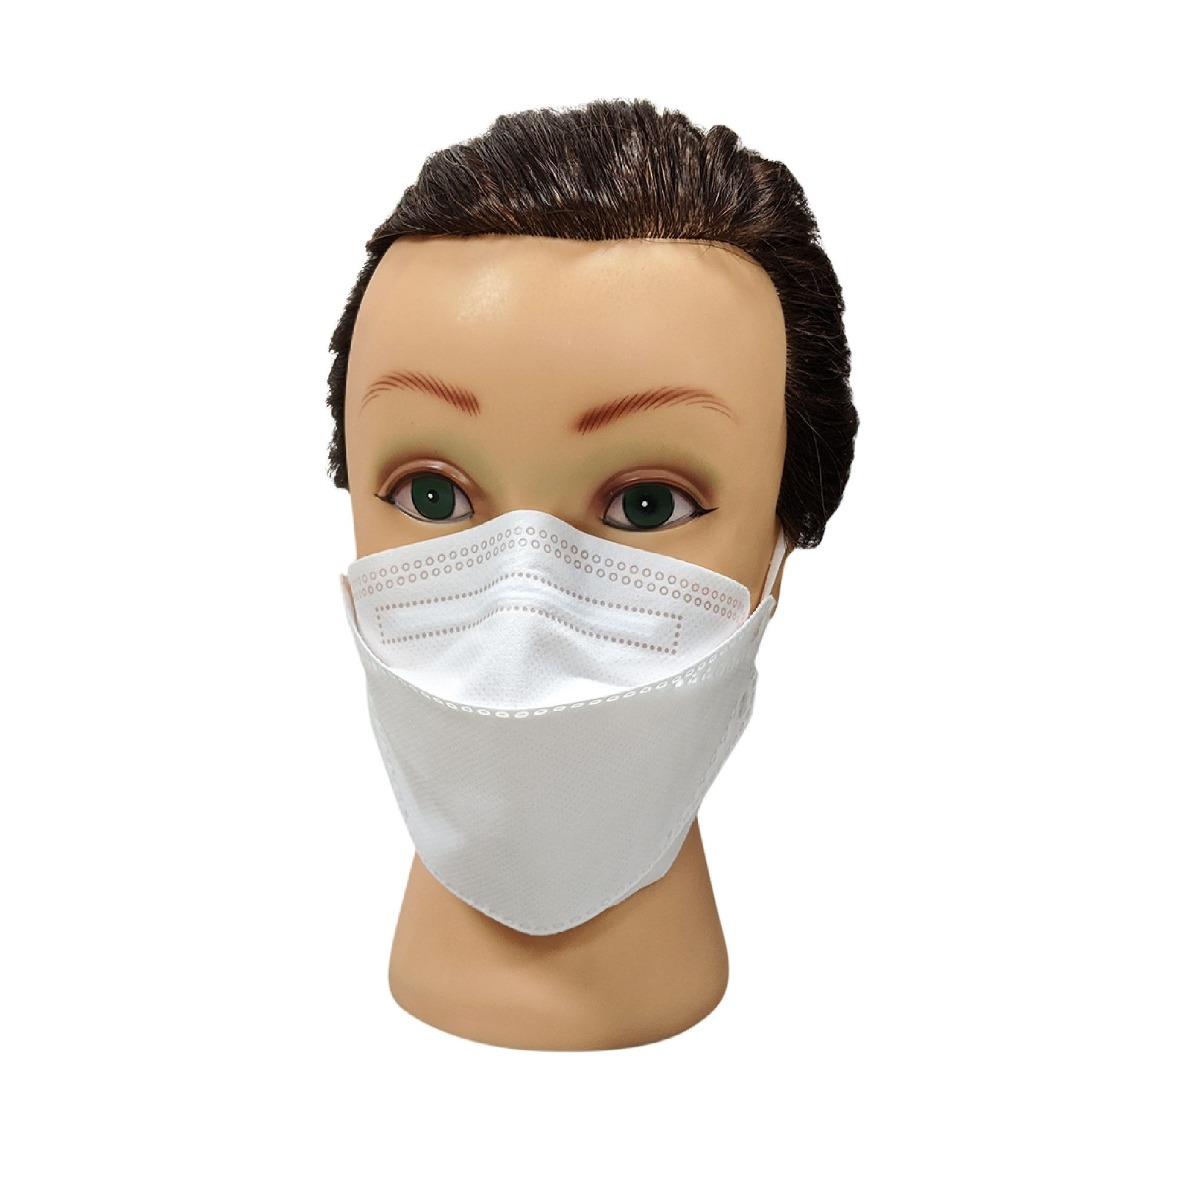 Helping the Pandemic: KN95 Masks